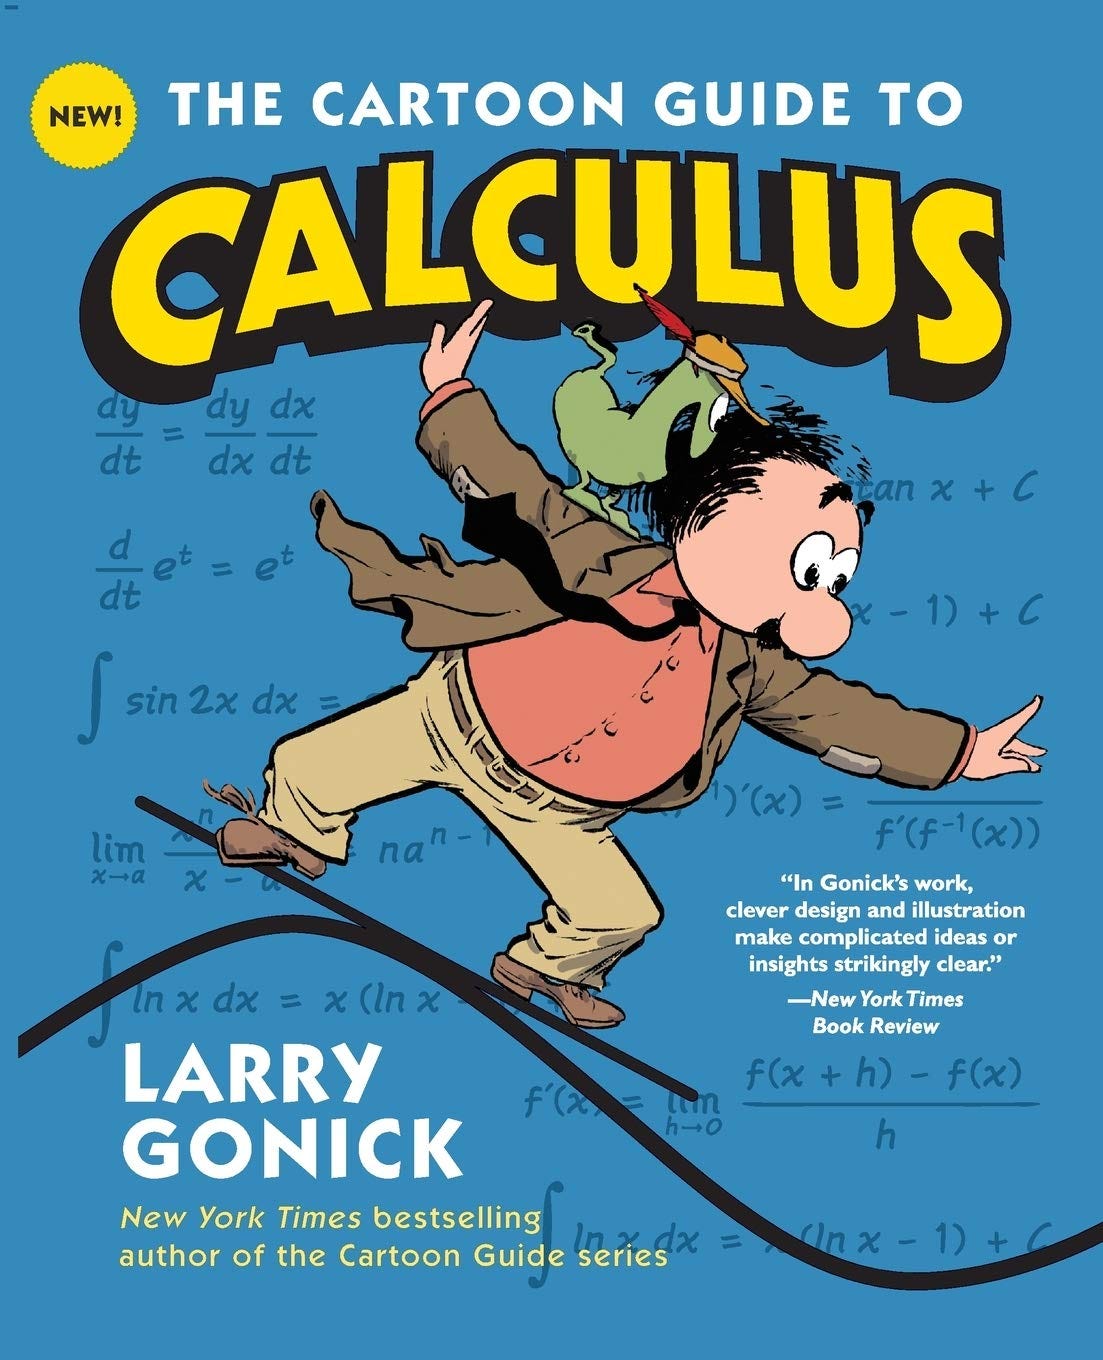 Buy The Cartoon Guide to Calculus (Cartoon Guide Series) Book Online at Low  Prices in India | The Cartoon Guide to Calculus (Cartoon Guide Series)  Reviews & Ratings - Amazon.in